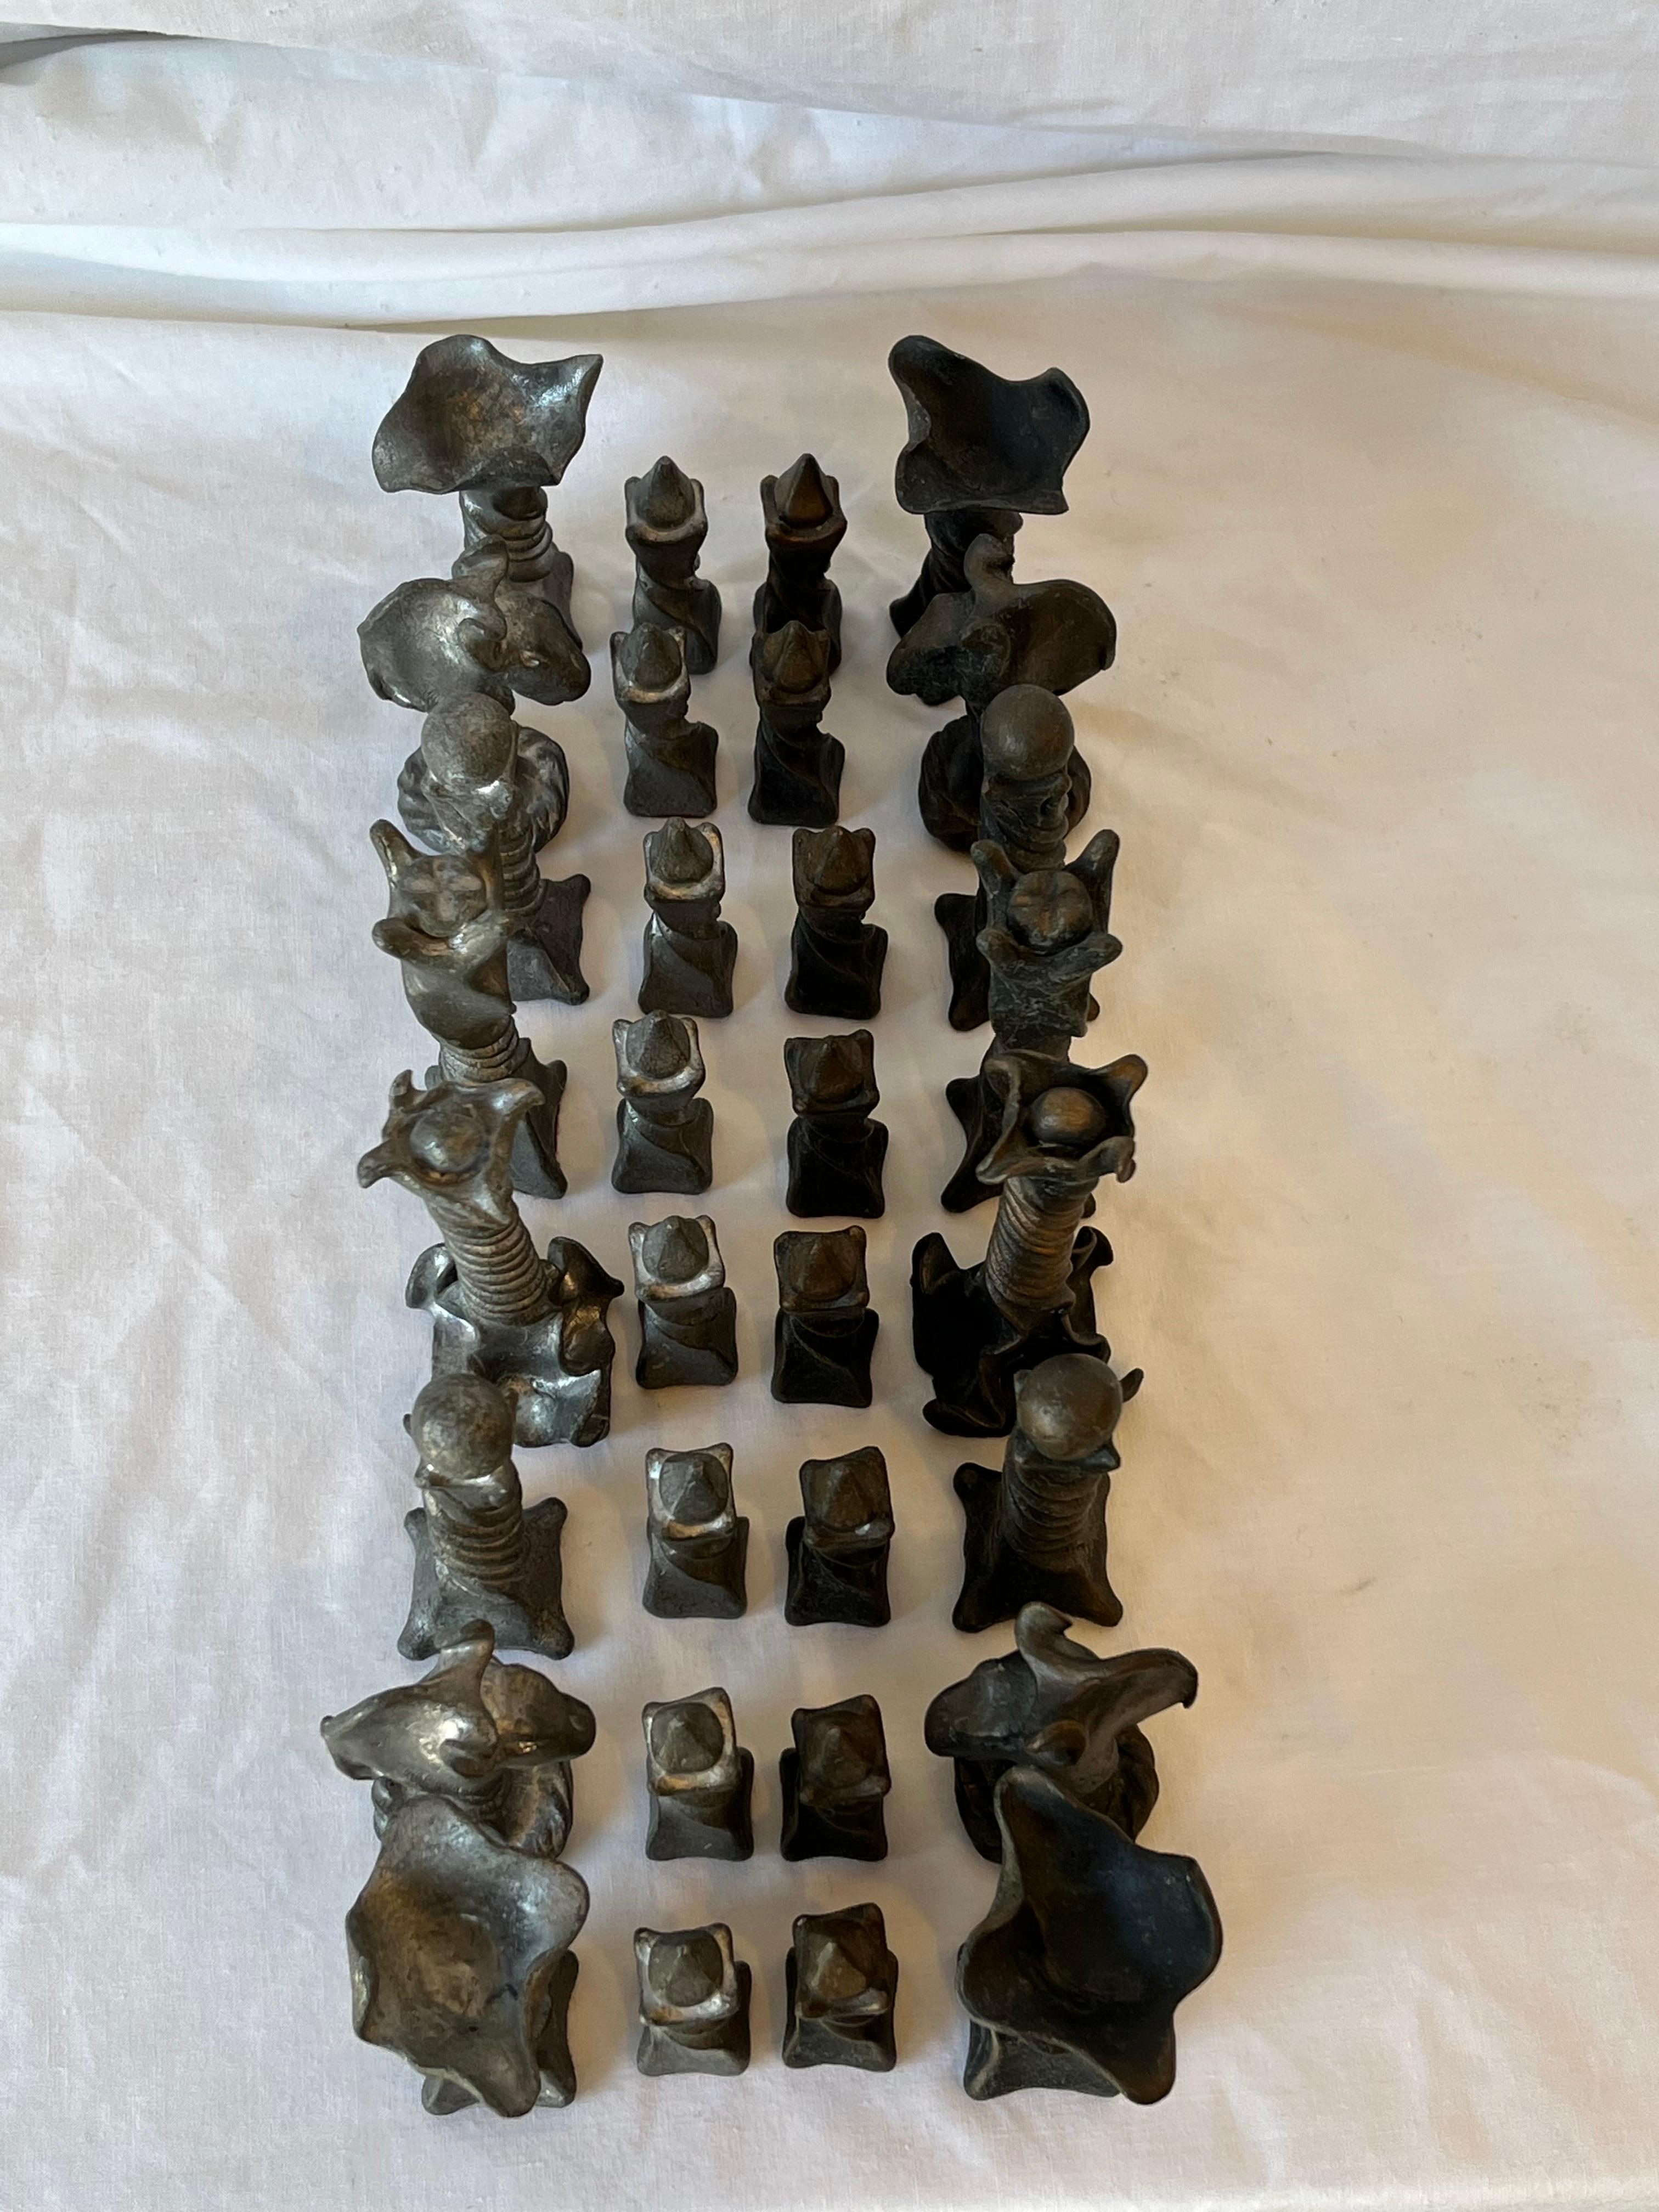 American Vintage Brutalist Style Cast Metal Chess Set with Twisted and Flanged Design